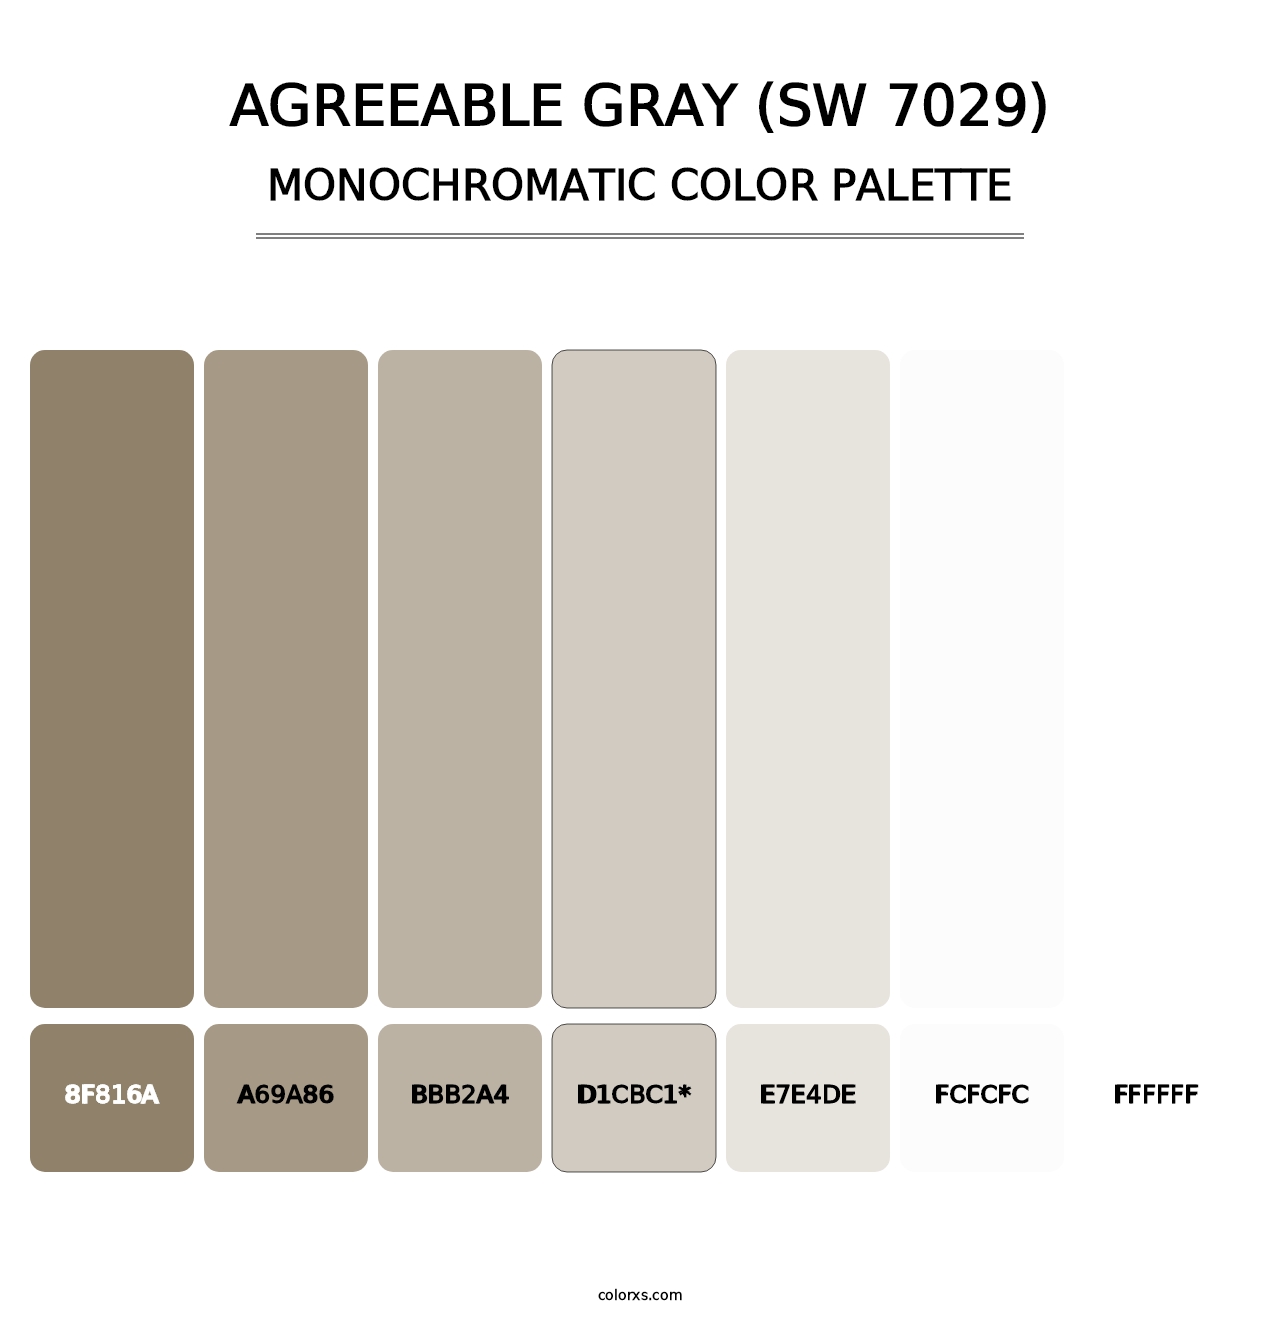 Agreeable Gray (SW 7029) - Monochromatic Color Palette